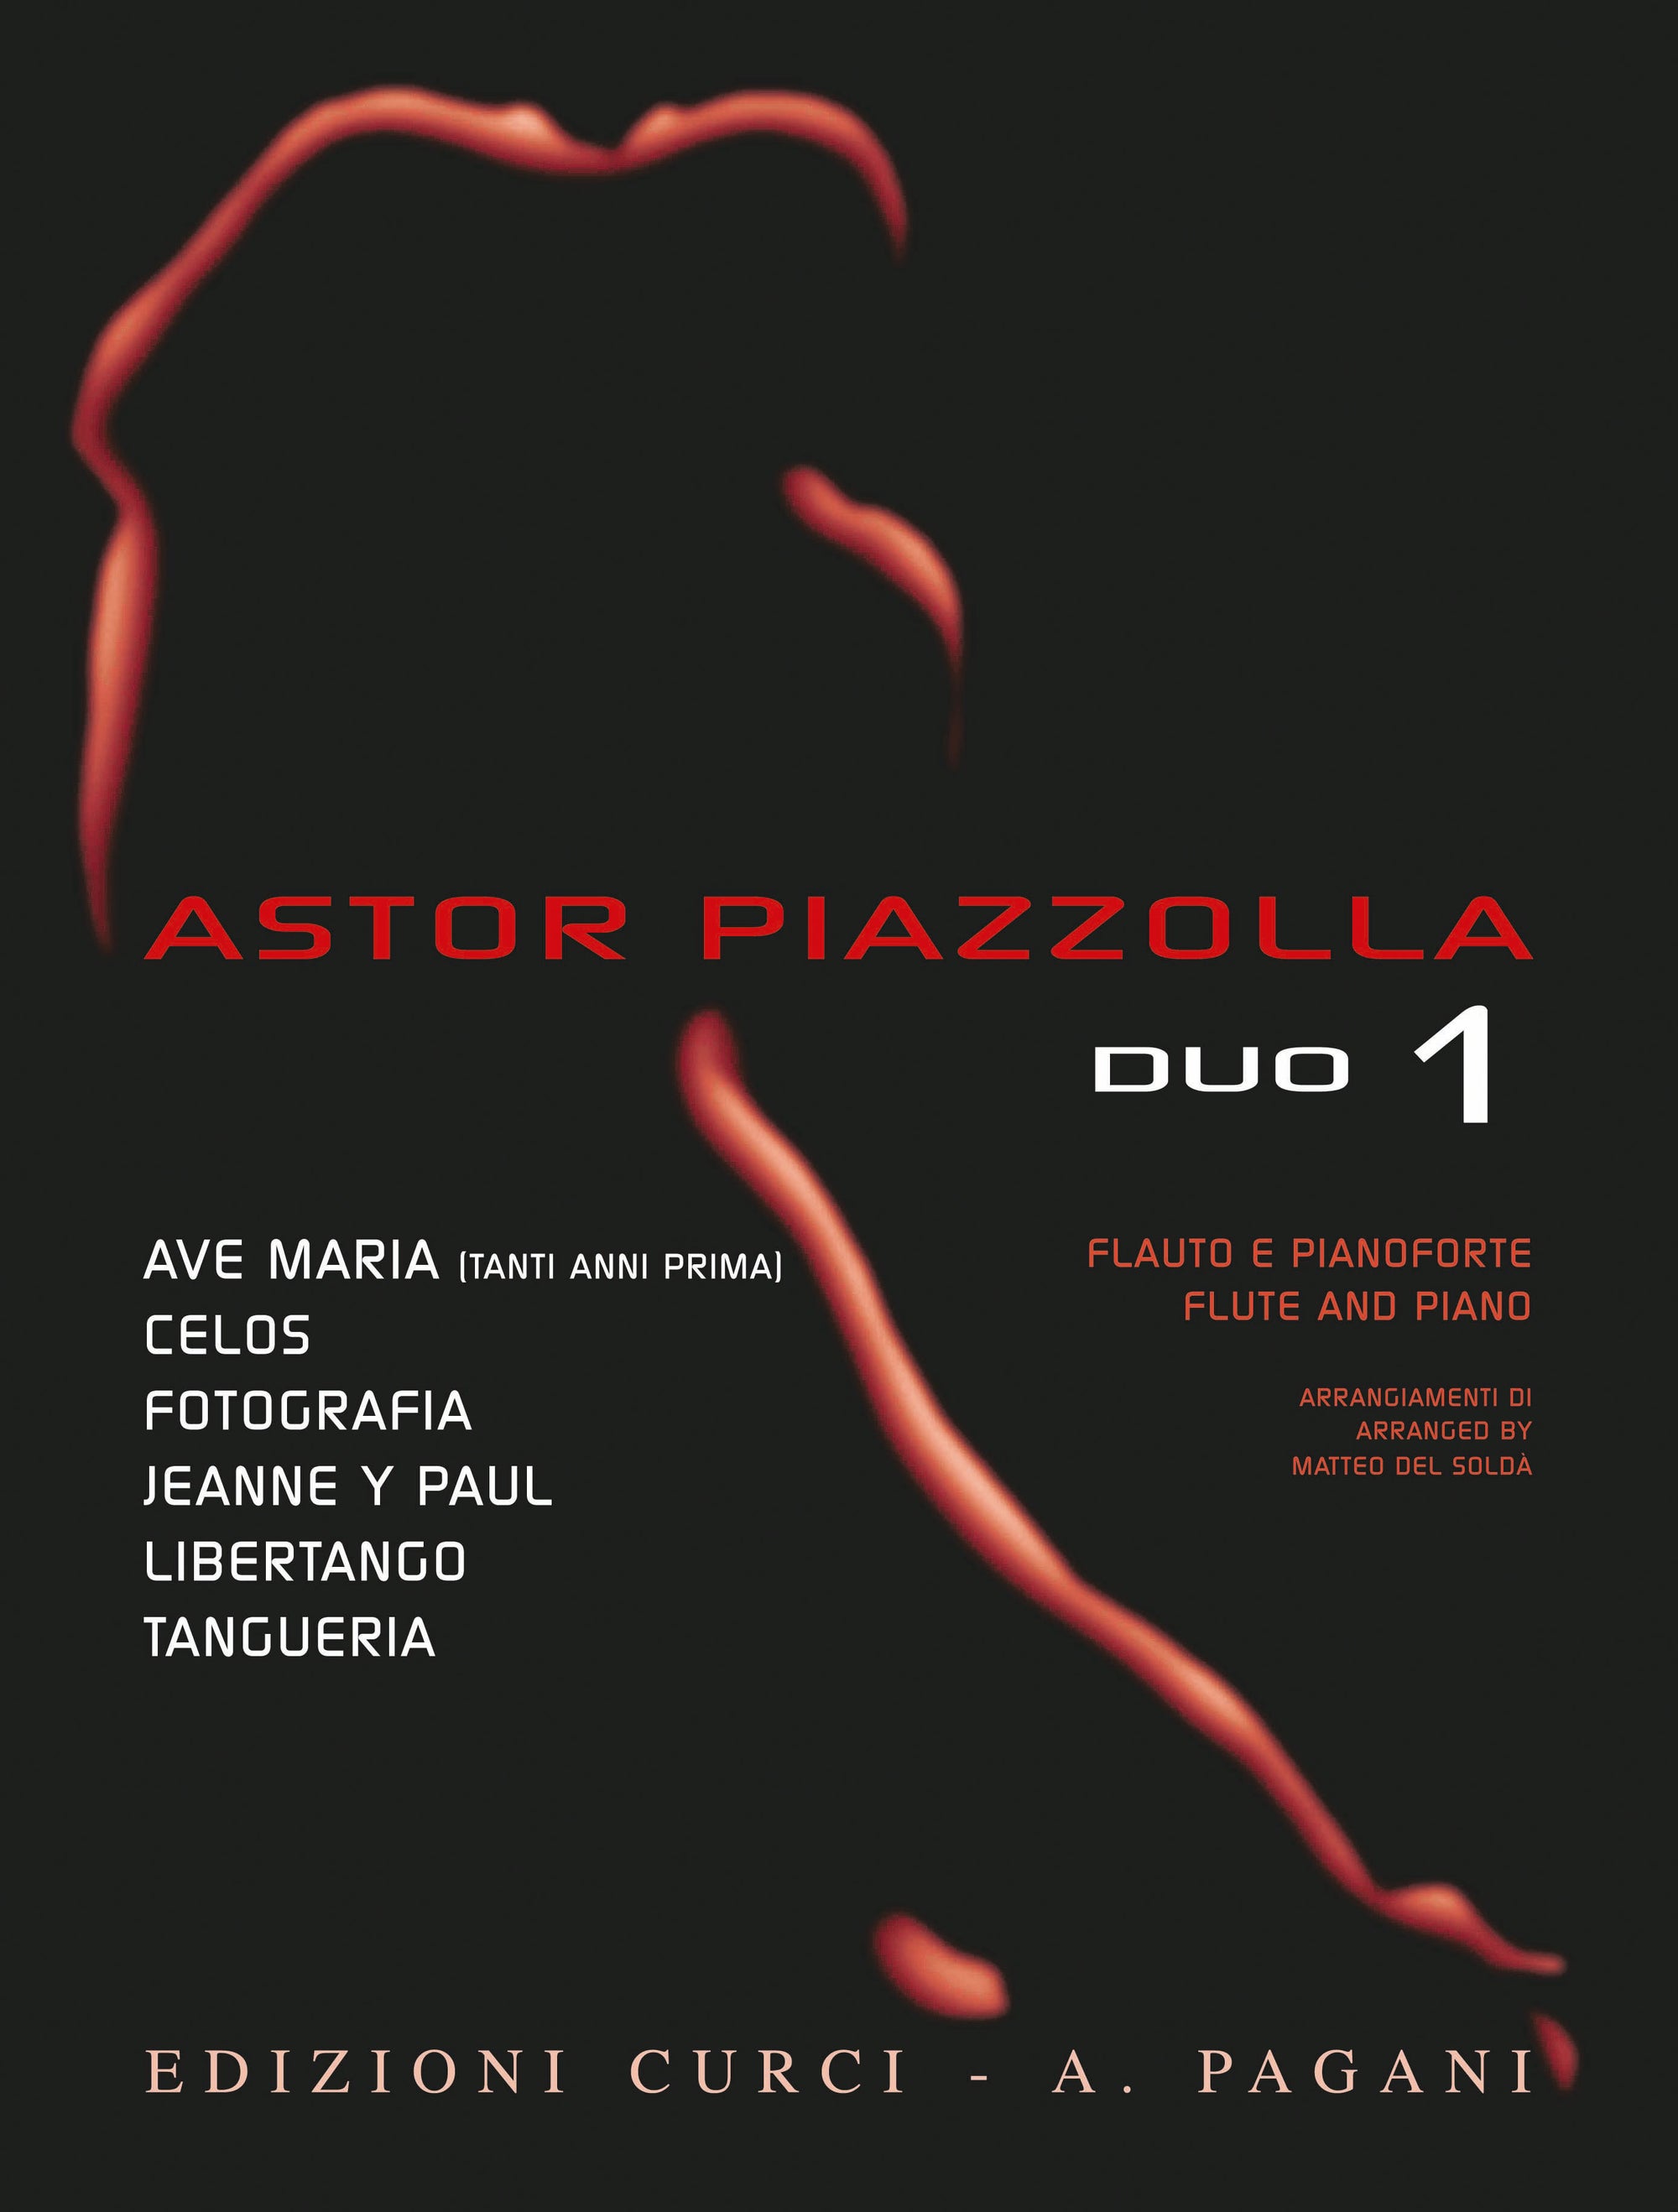 Piazzolla for Duo - Volume 1